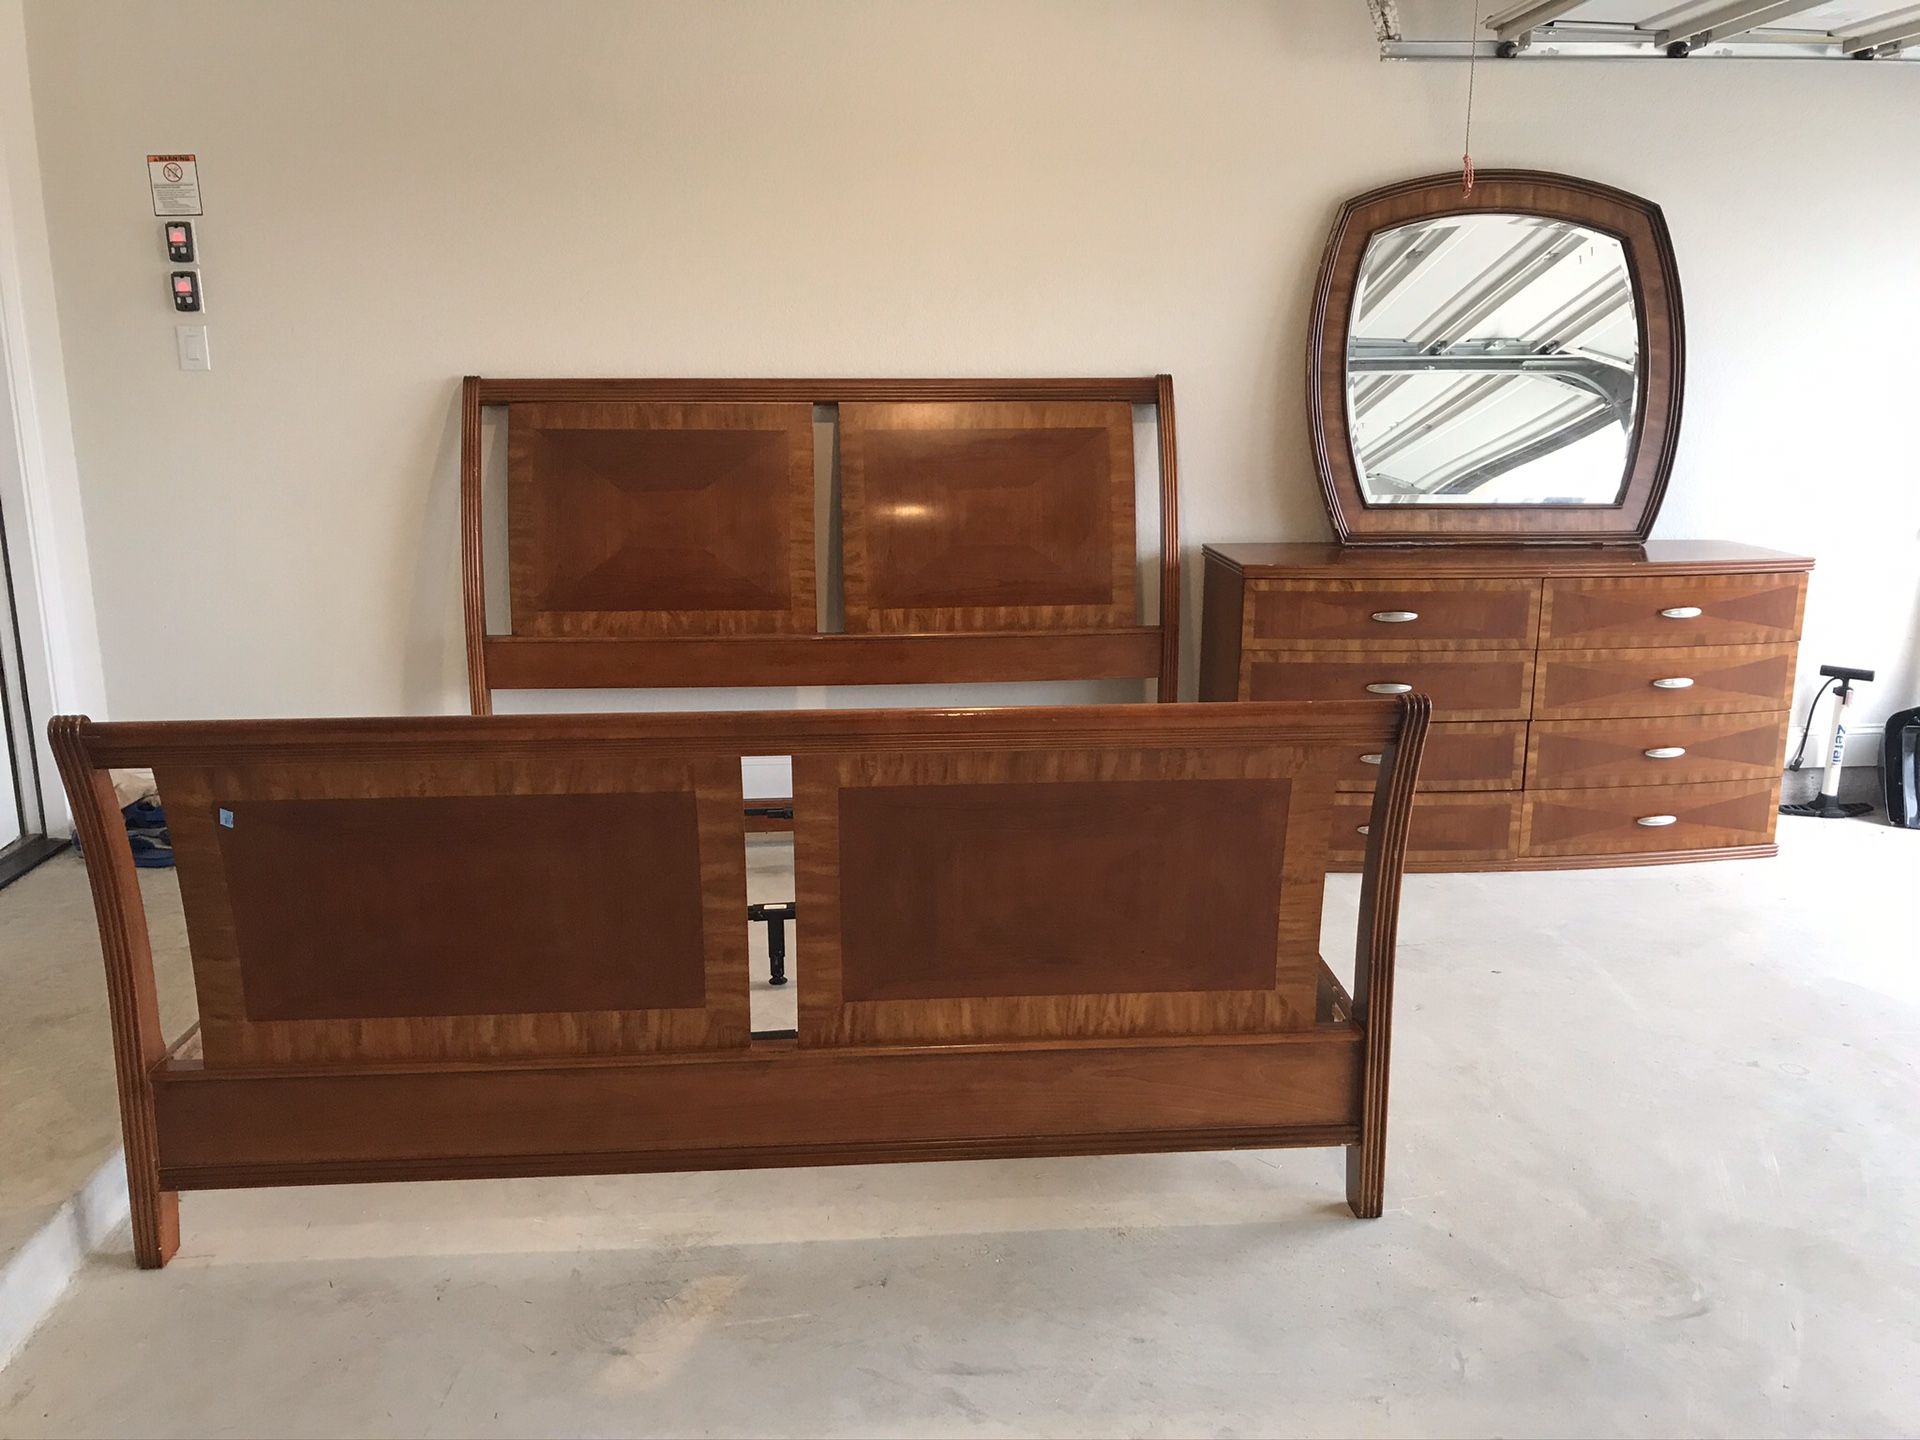 CALIFORNIA KING BED INCLUDING HEADBOARD & FRAMES & 8-DRAWER DRESSER W/ MIRROR ( Excellent Condition) (($400 OBO))